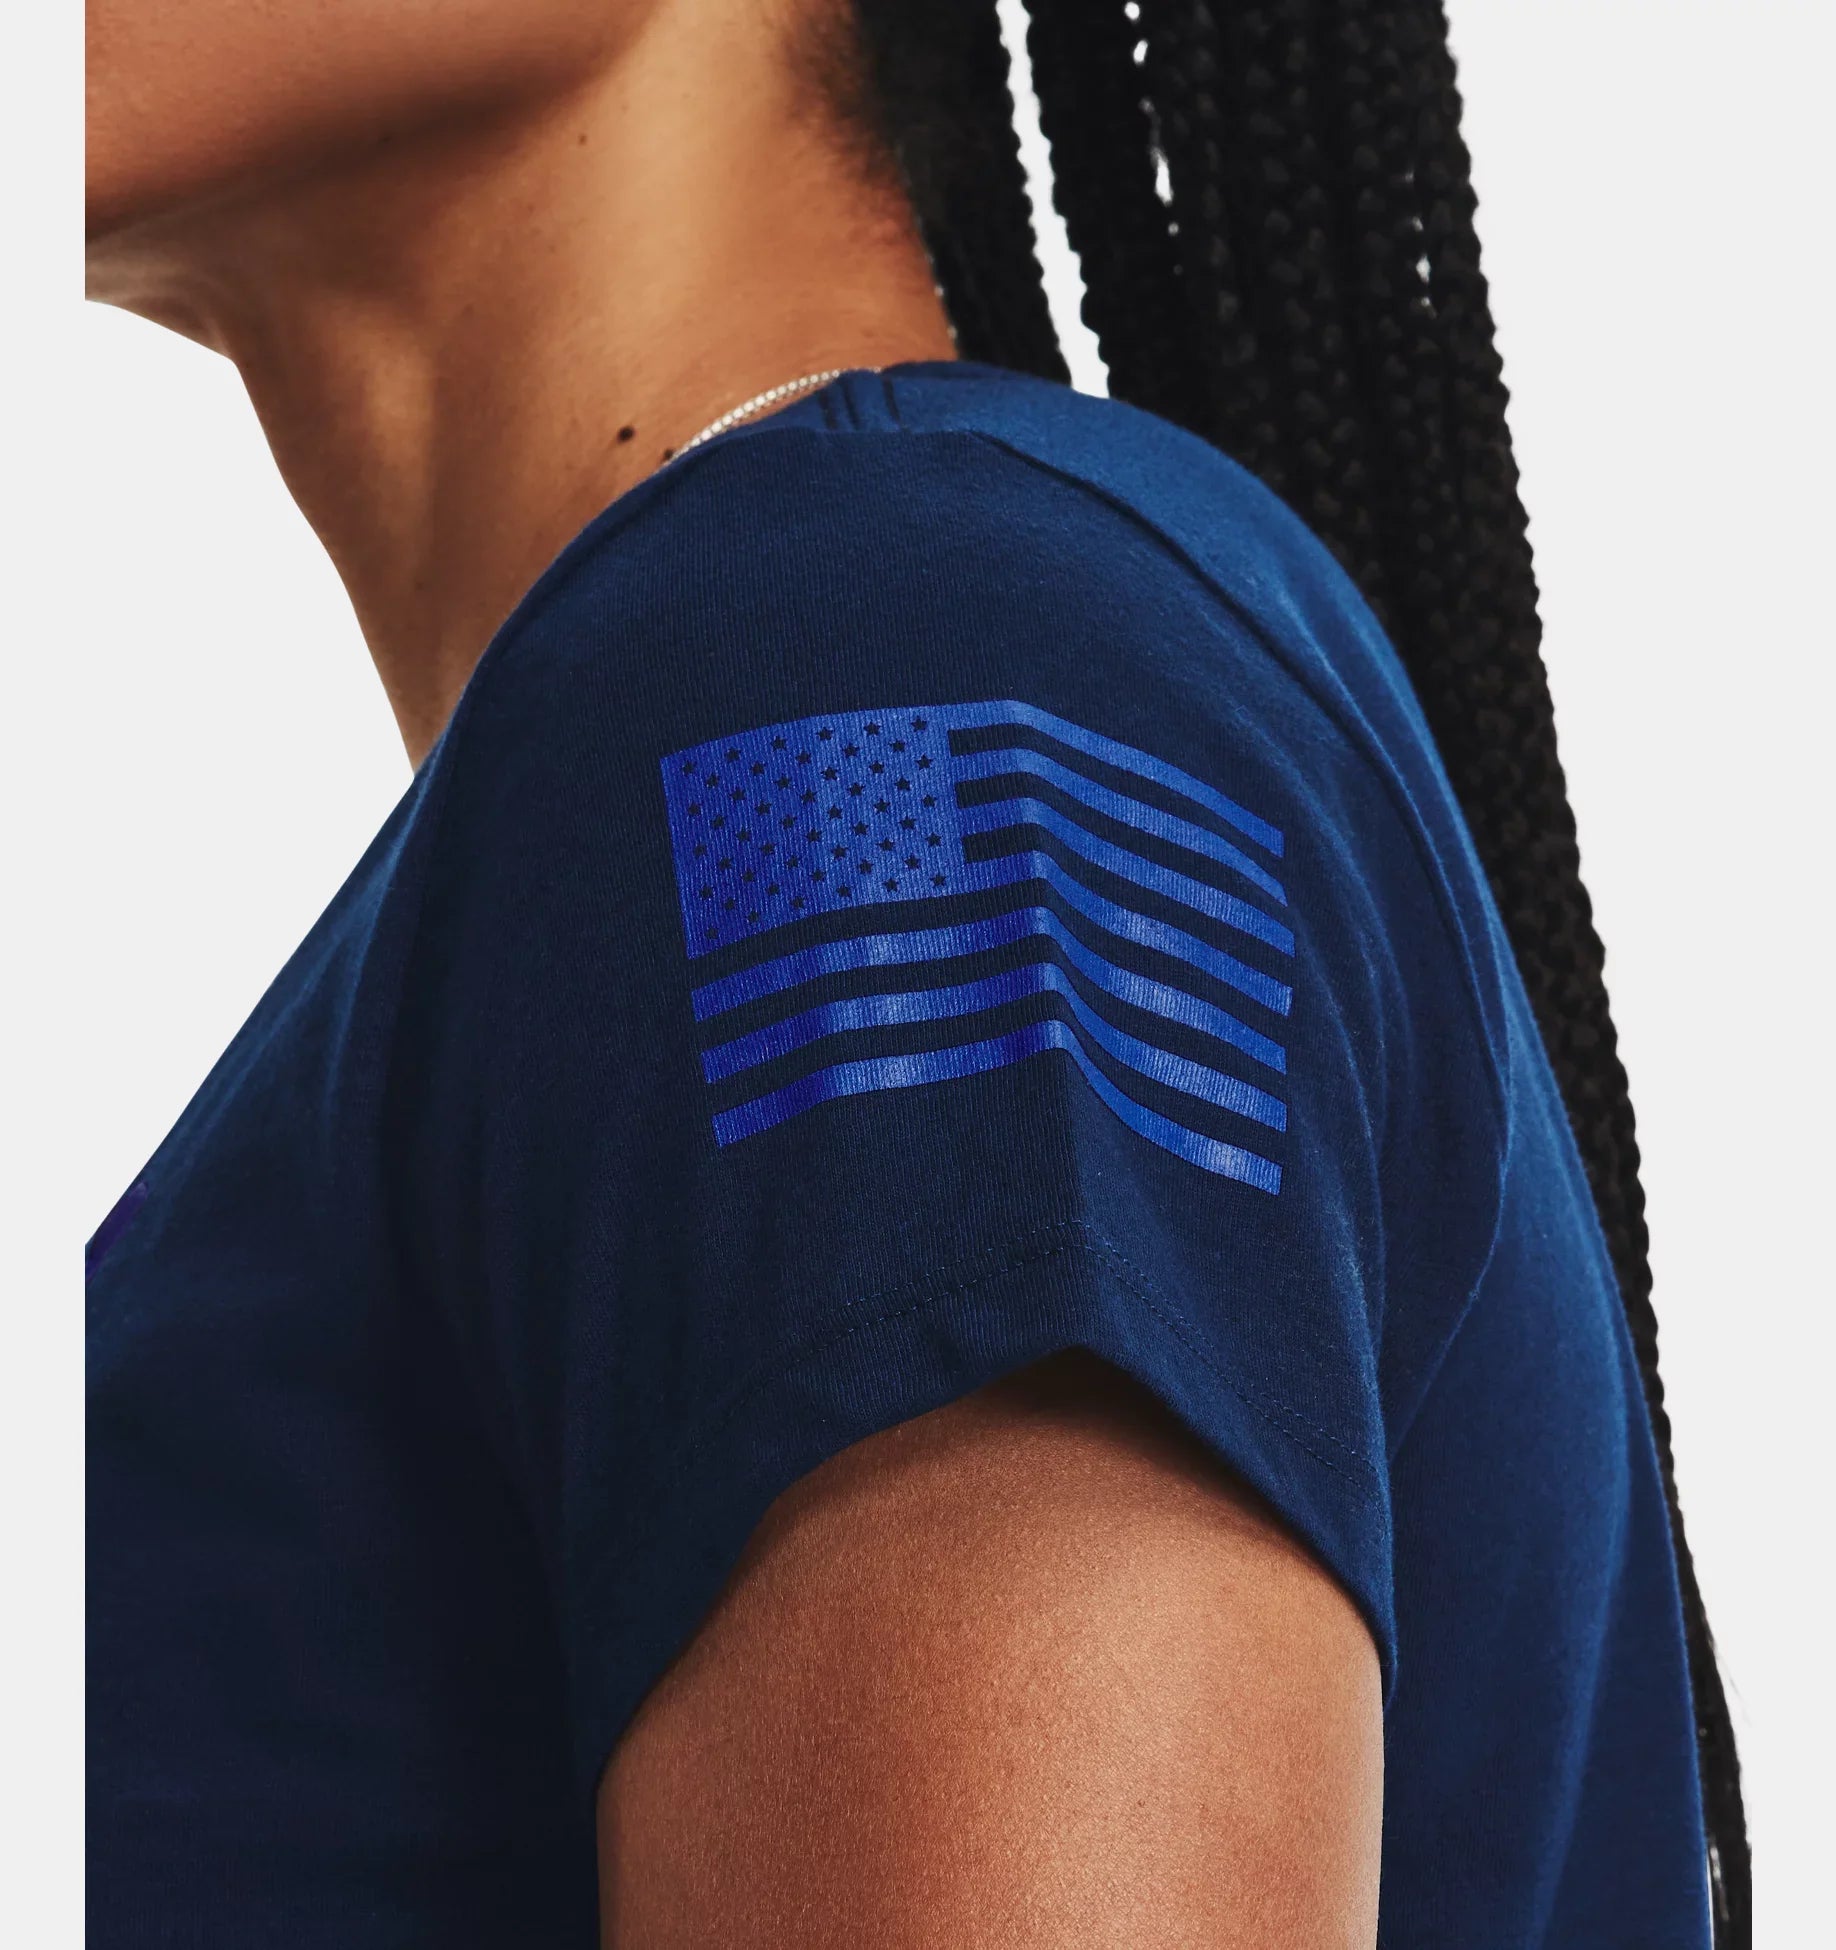 Under Armour Ladies New Freedom Flag T-Shirt (Navy)